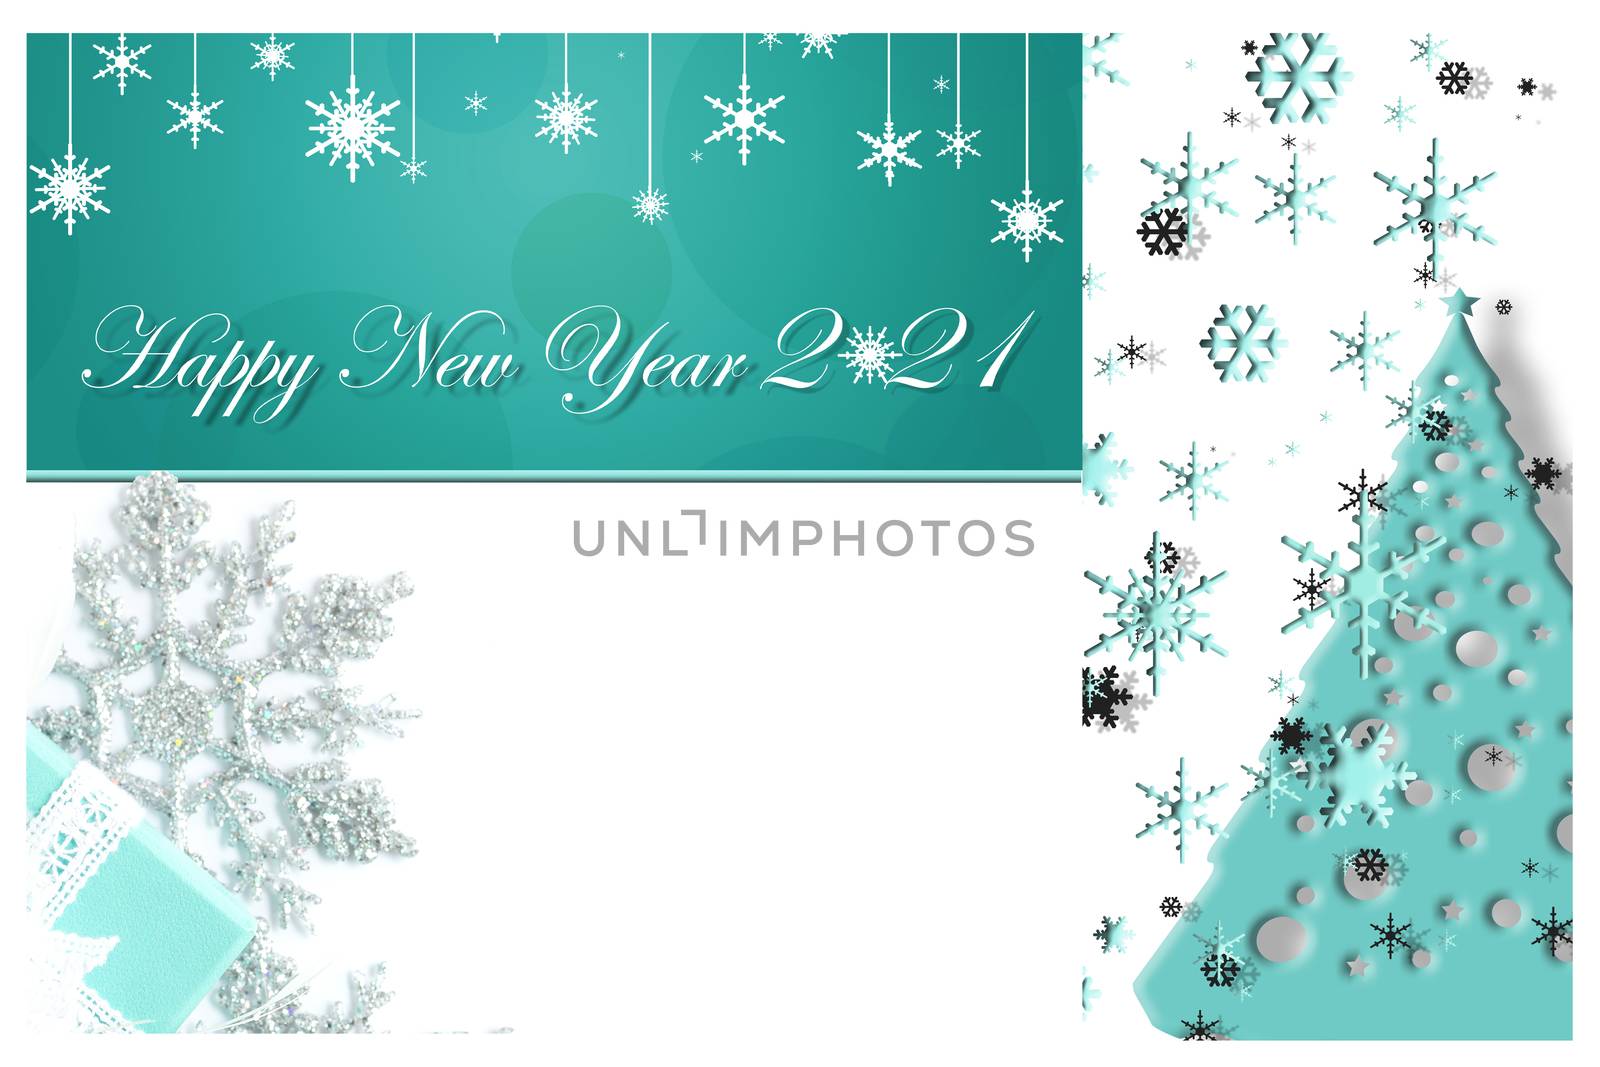 Christmas and new year collage in turquoise blue by NelliPolk